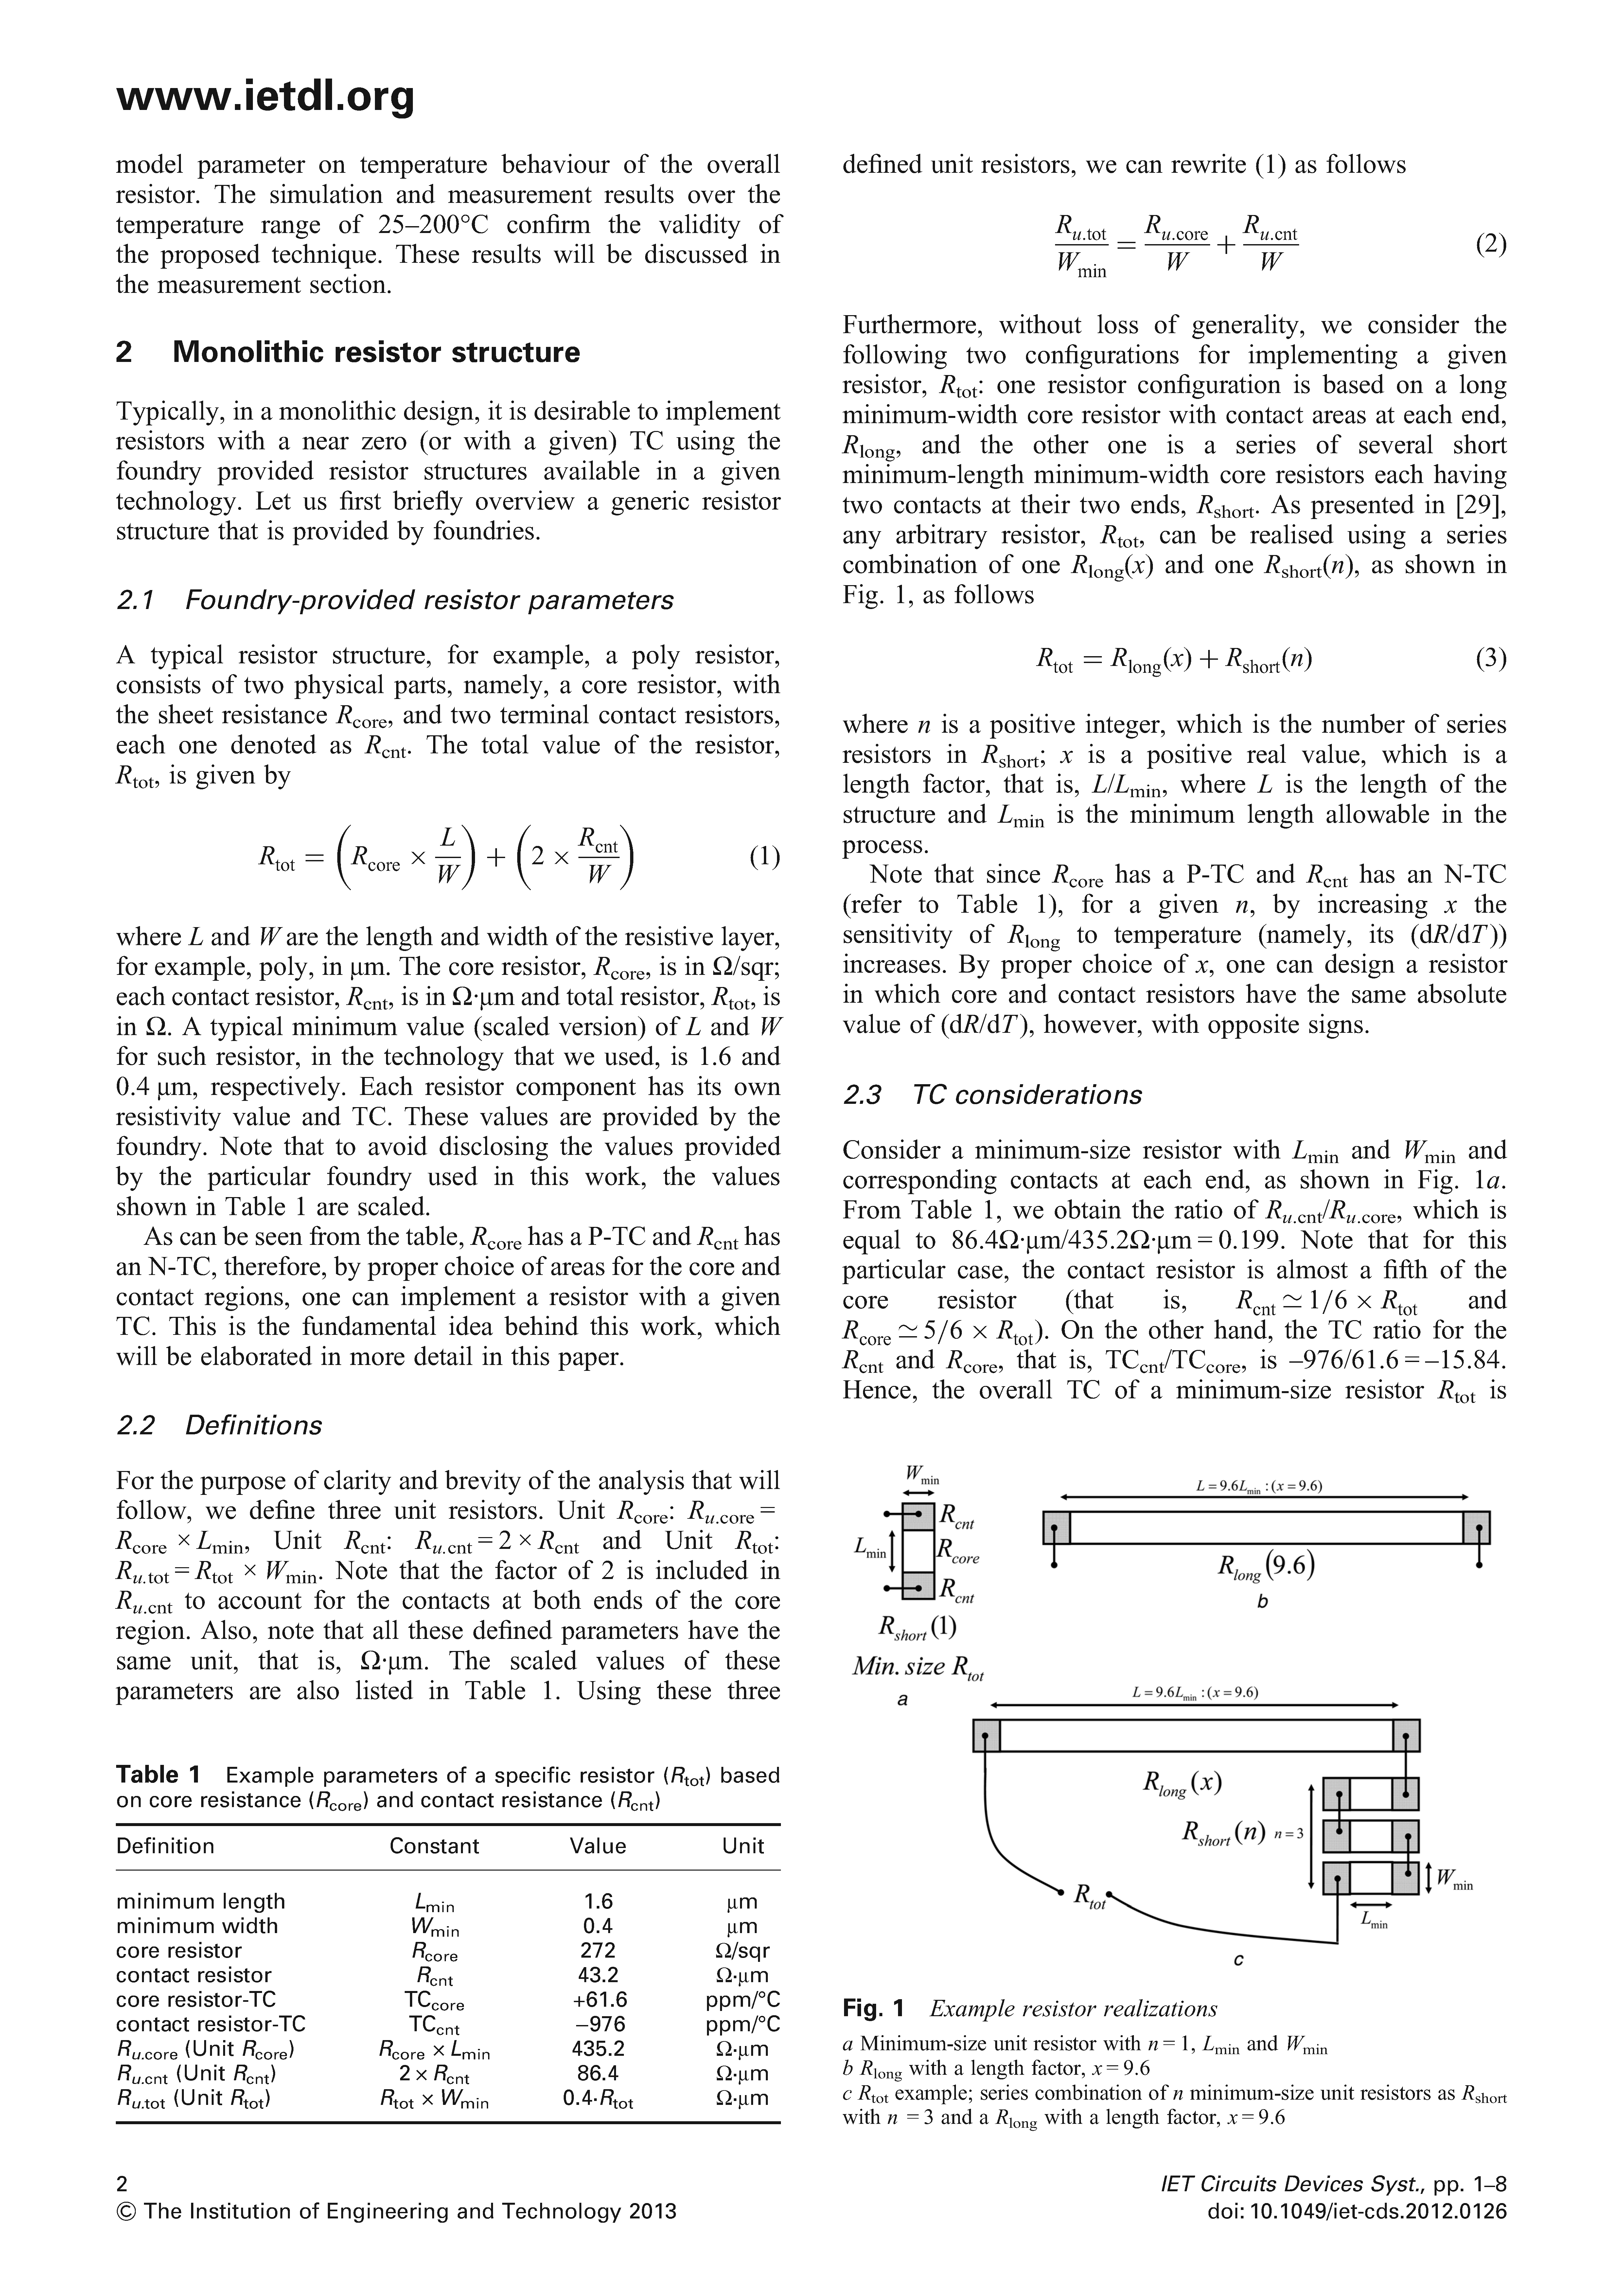 Analysis and Design of Monolithic Resistors with a Desired Temperature Coefficient Using Contacts Page 2